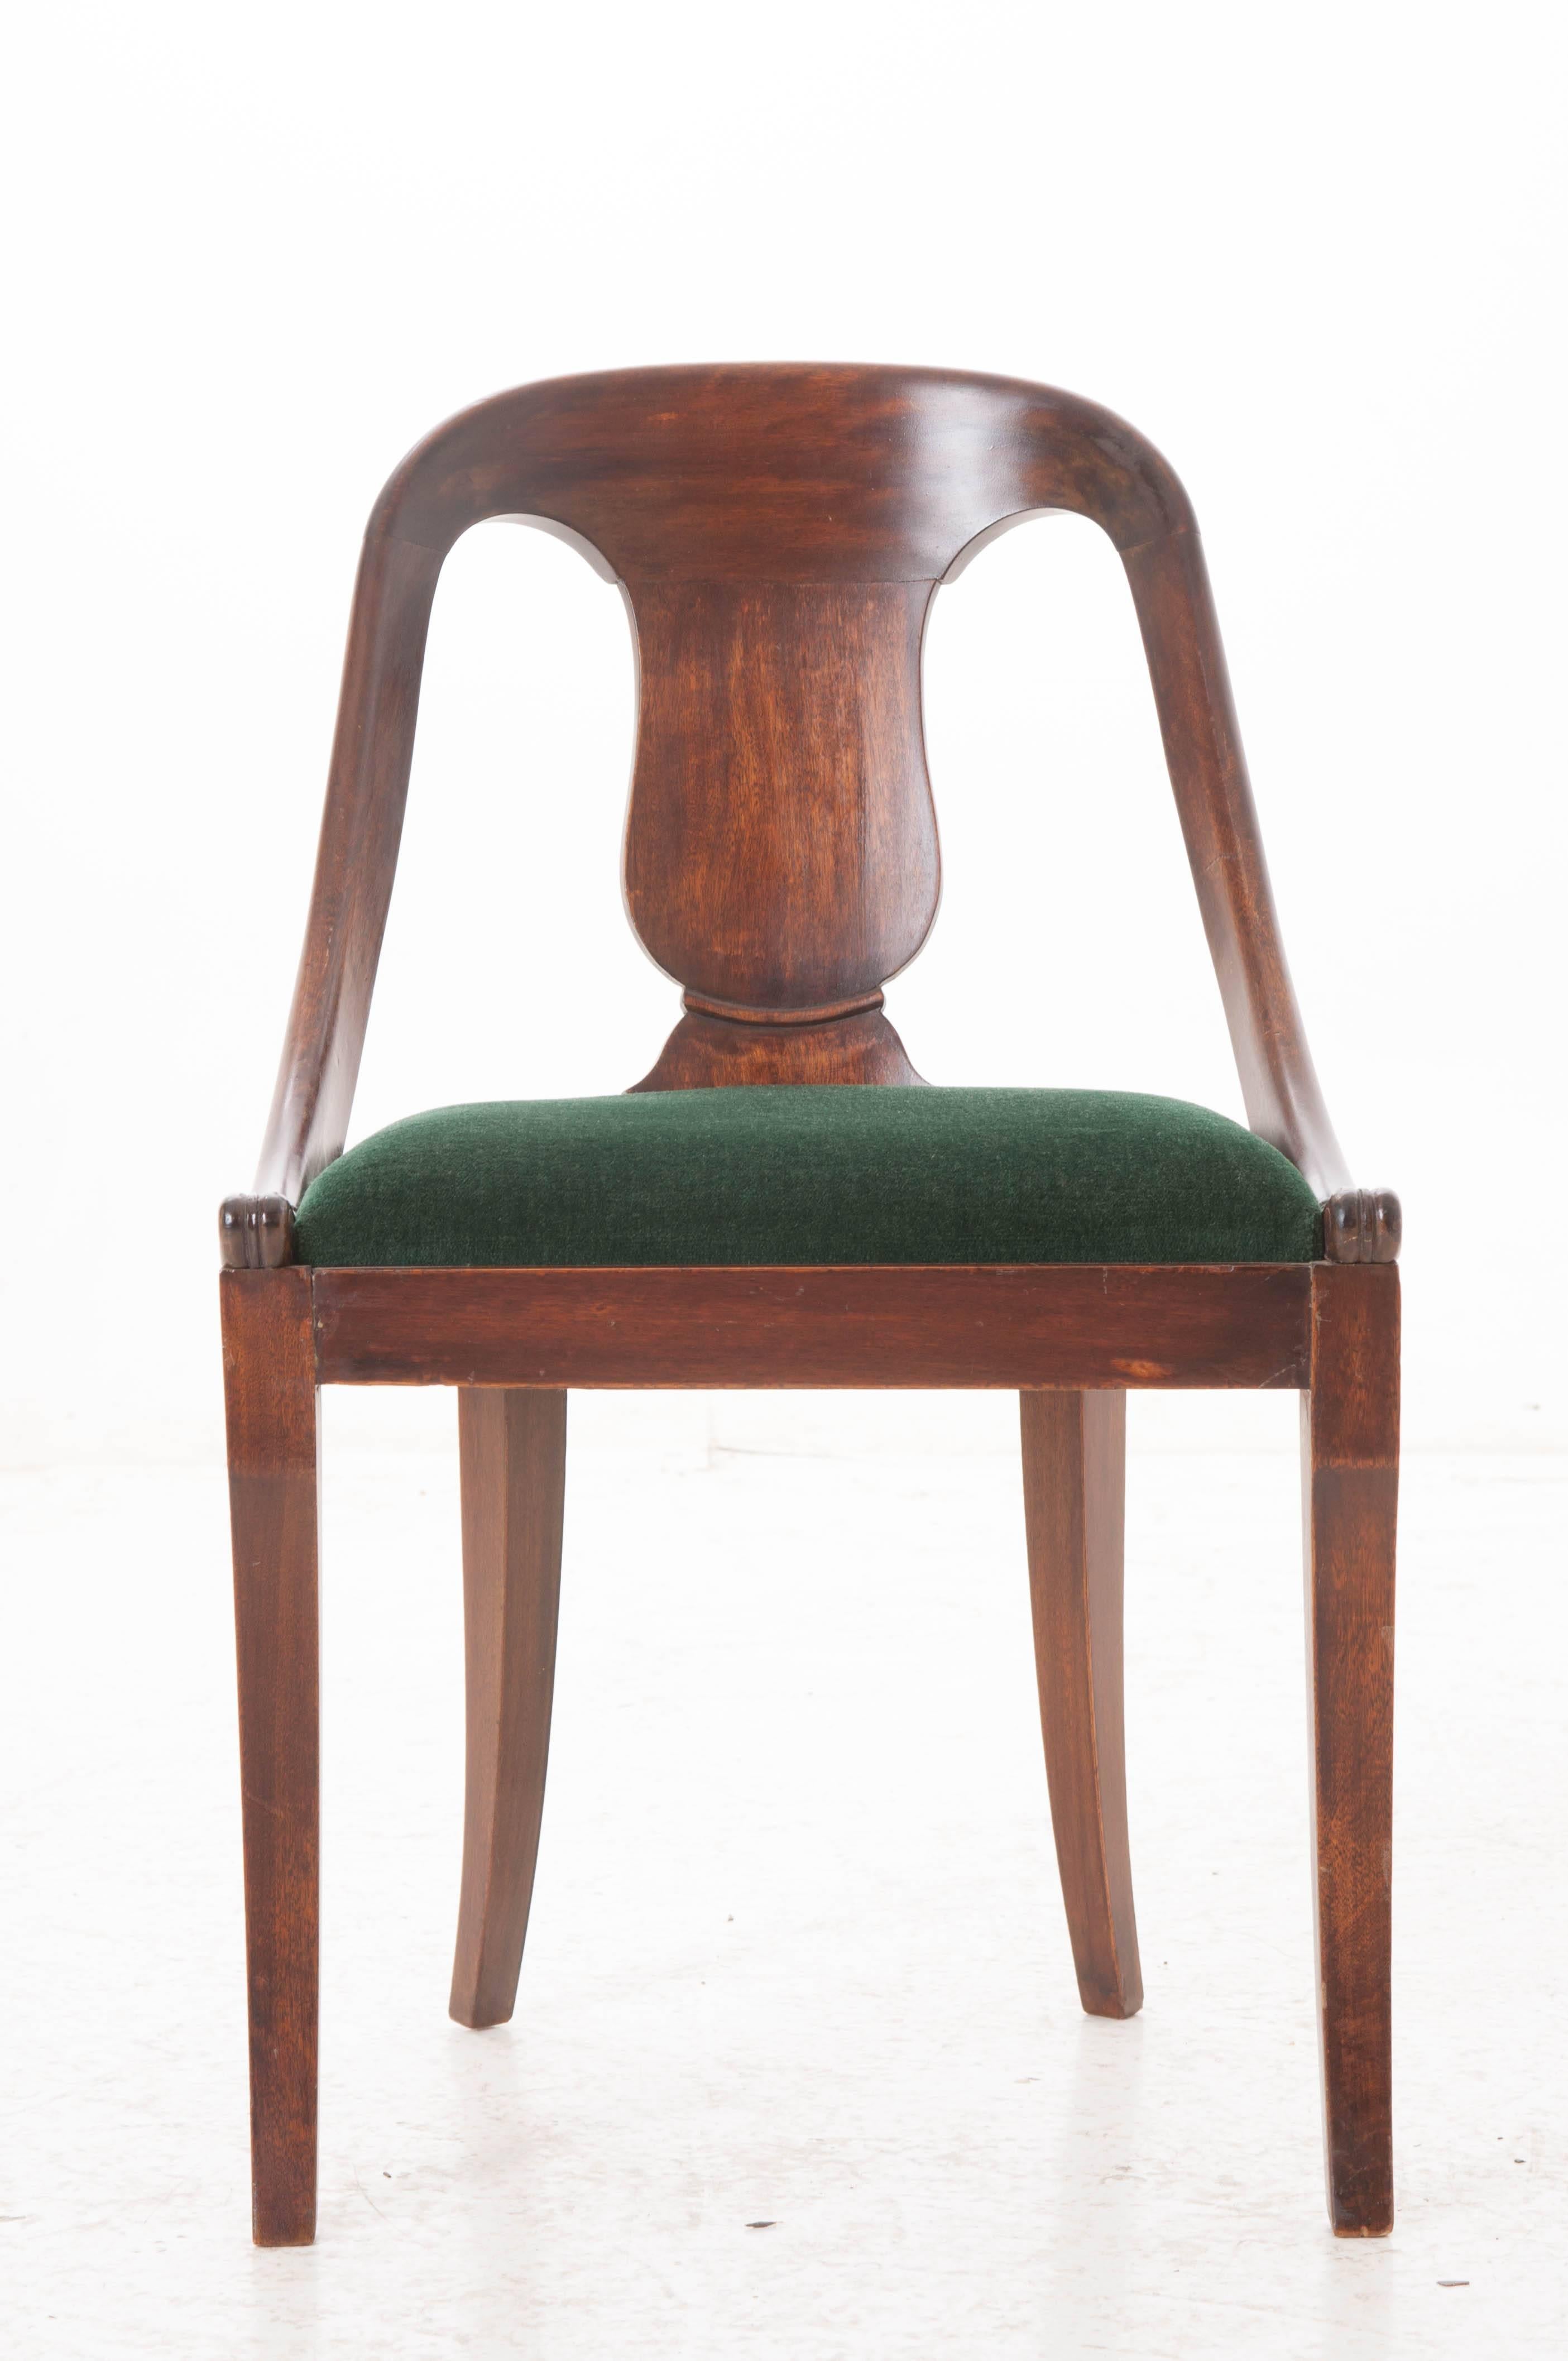 Made in the early 1900s, this absolutely adorable mahogany chair may be lacking in stature, but more than makes up for it in personality. Beautiful, rich, dark stain brings the mahogany to life. From the gracefully curved back extends two implied